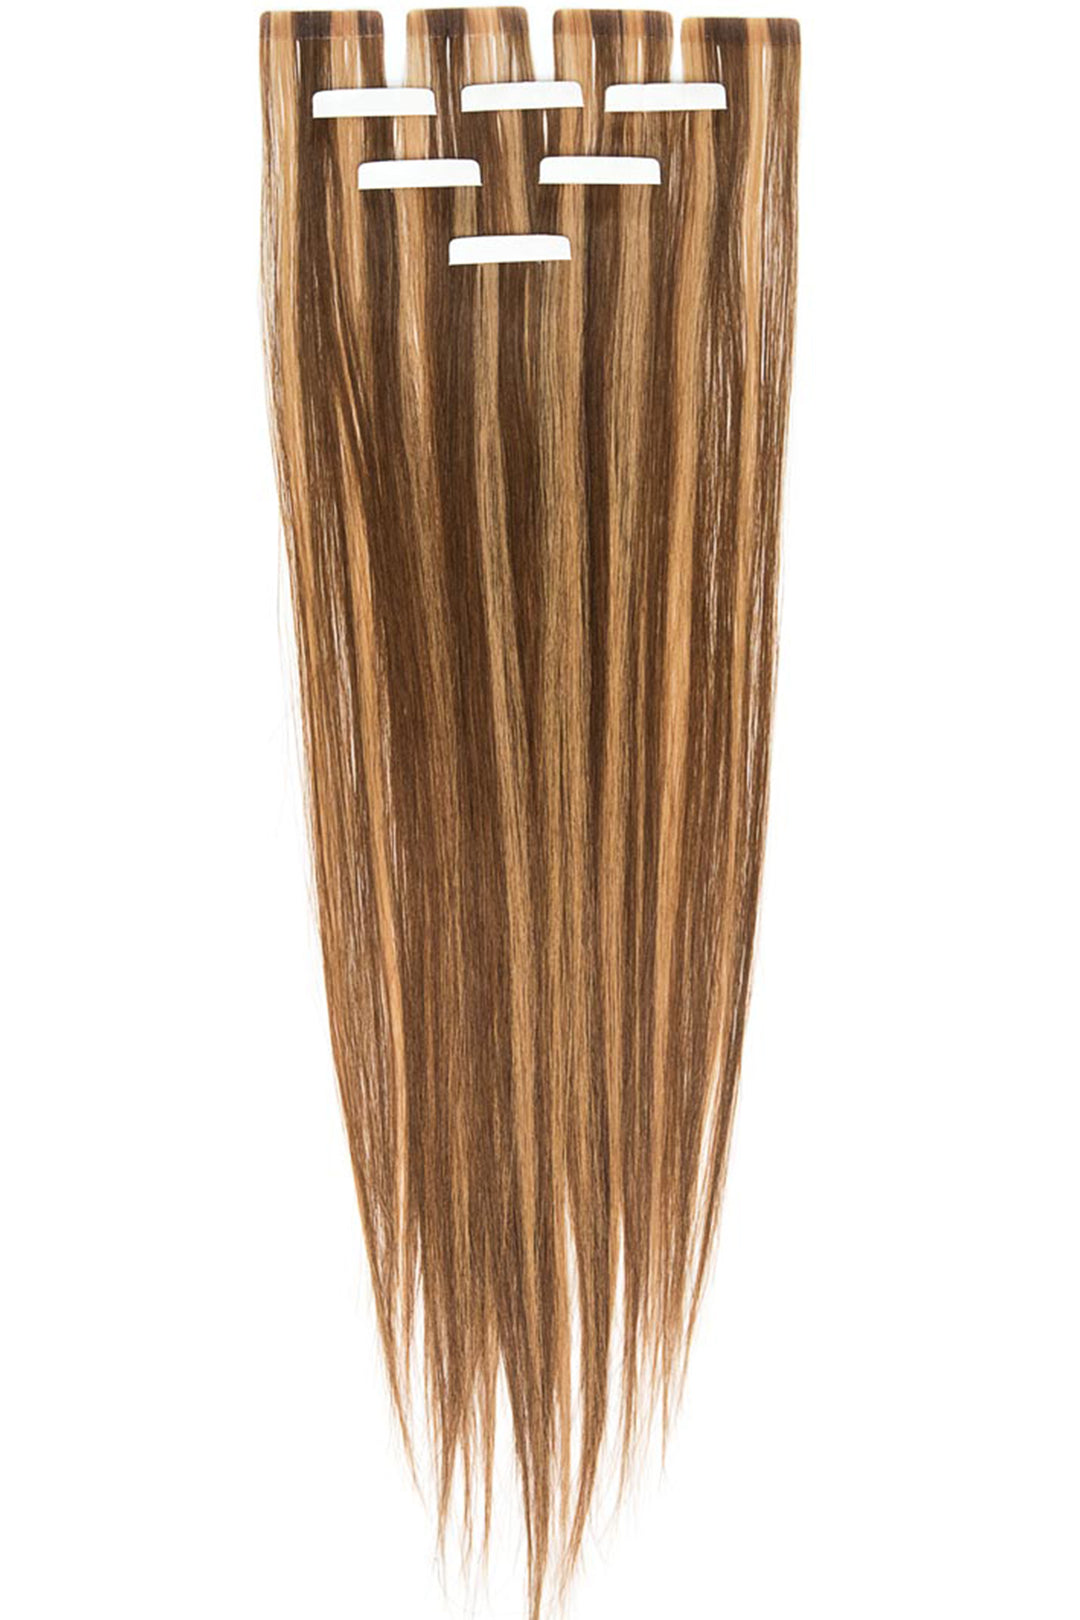 AVERA #4/27 Mixed Blonde Tape-In Hair Extension